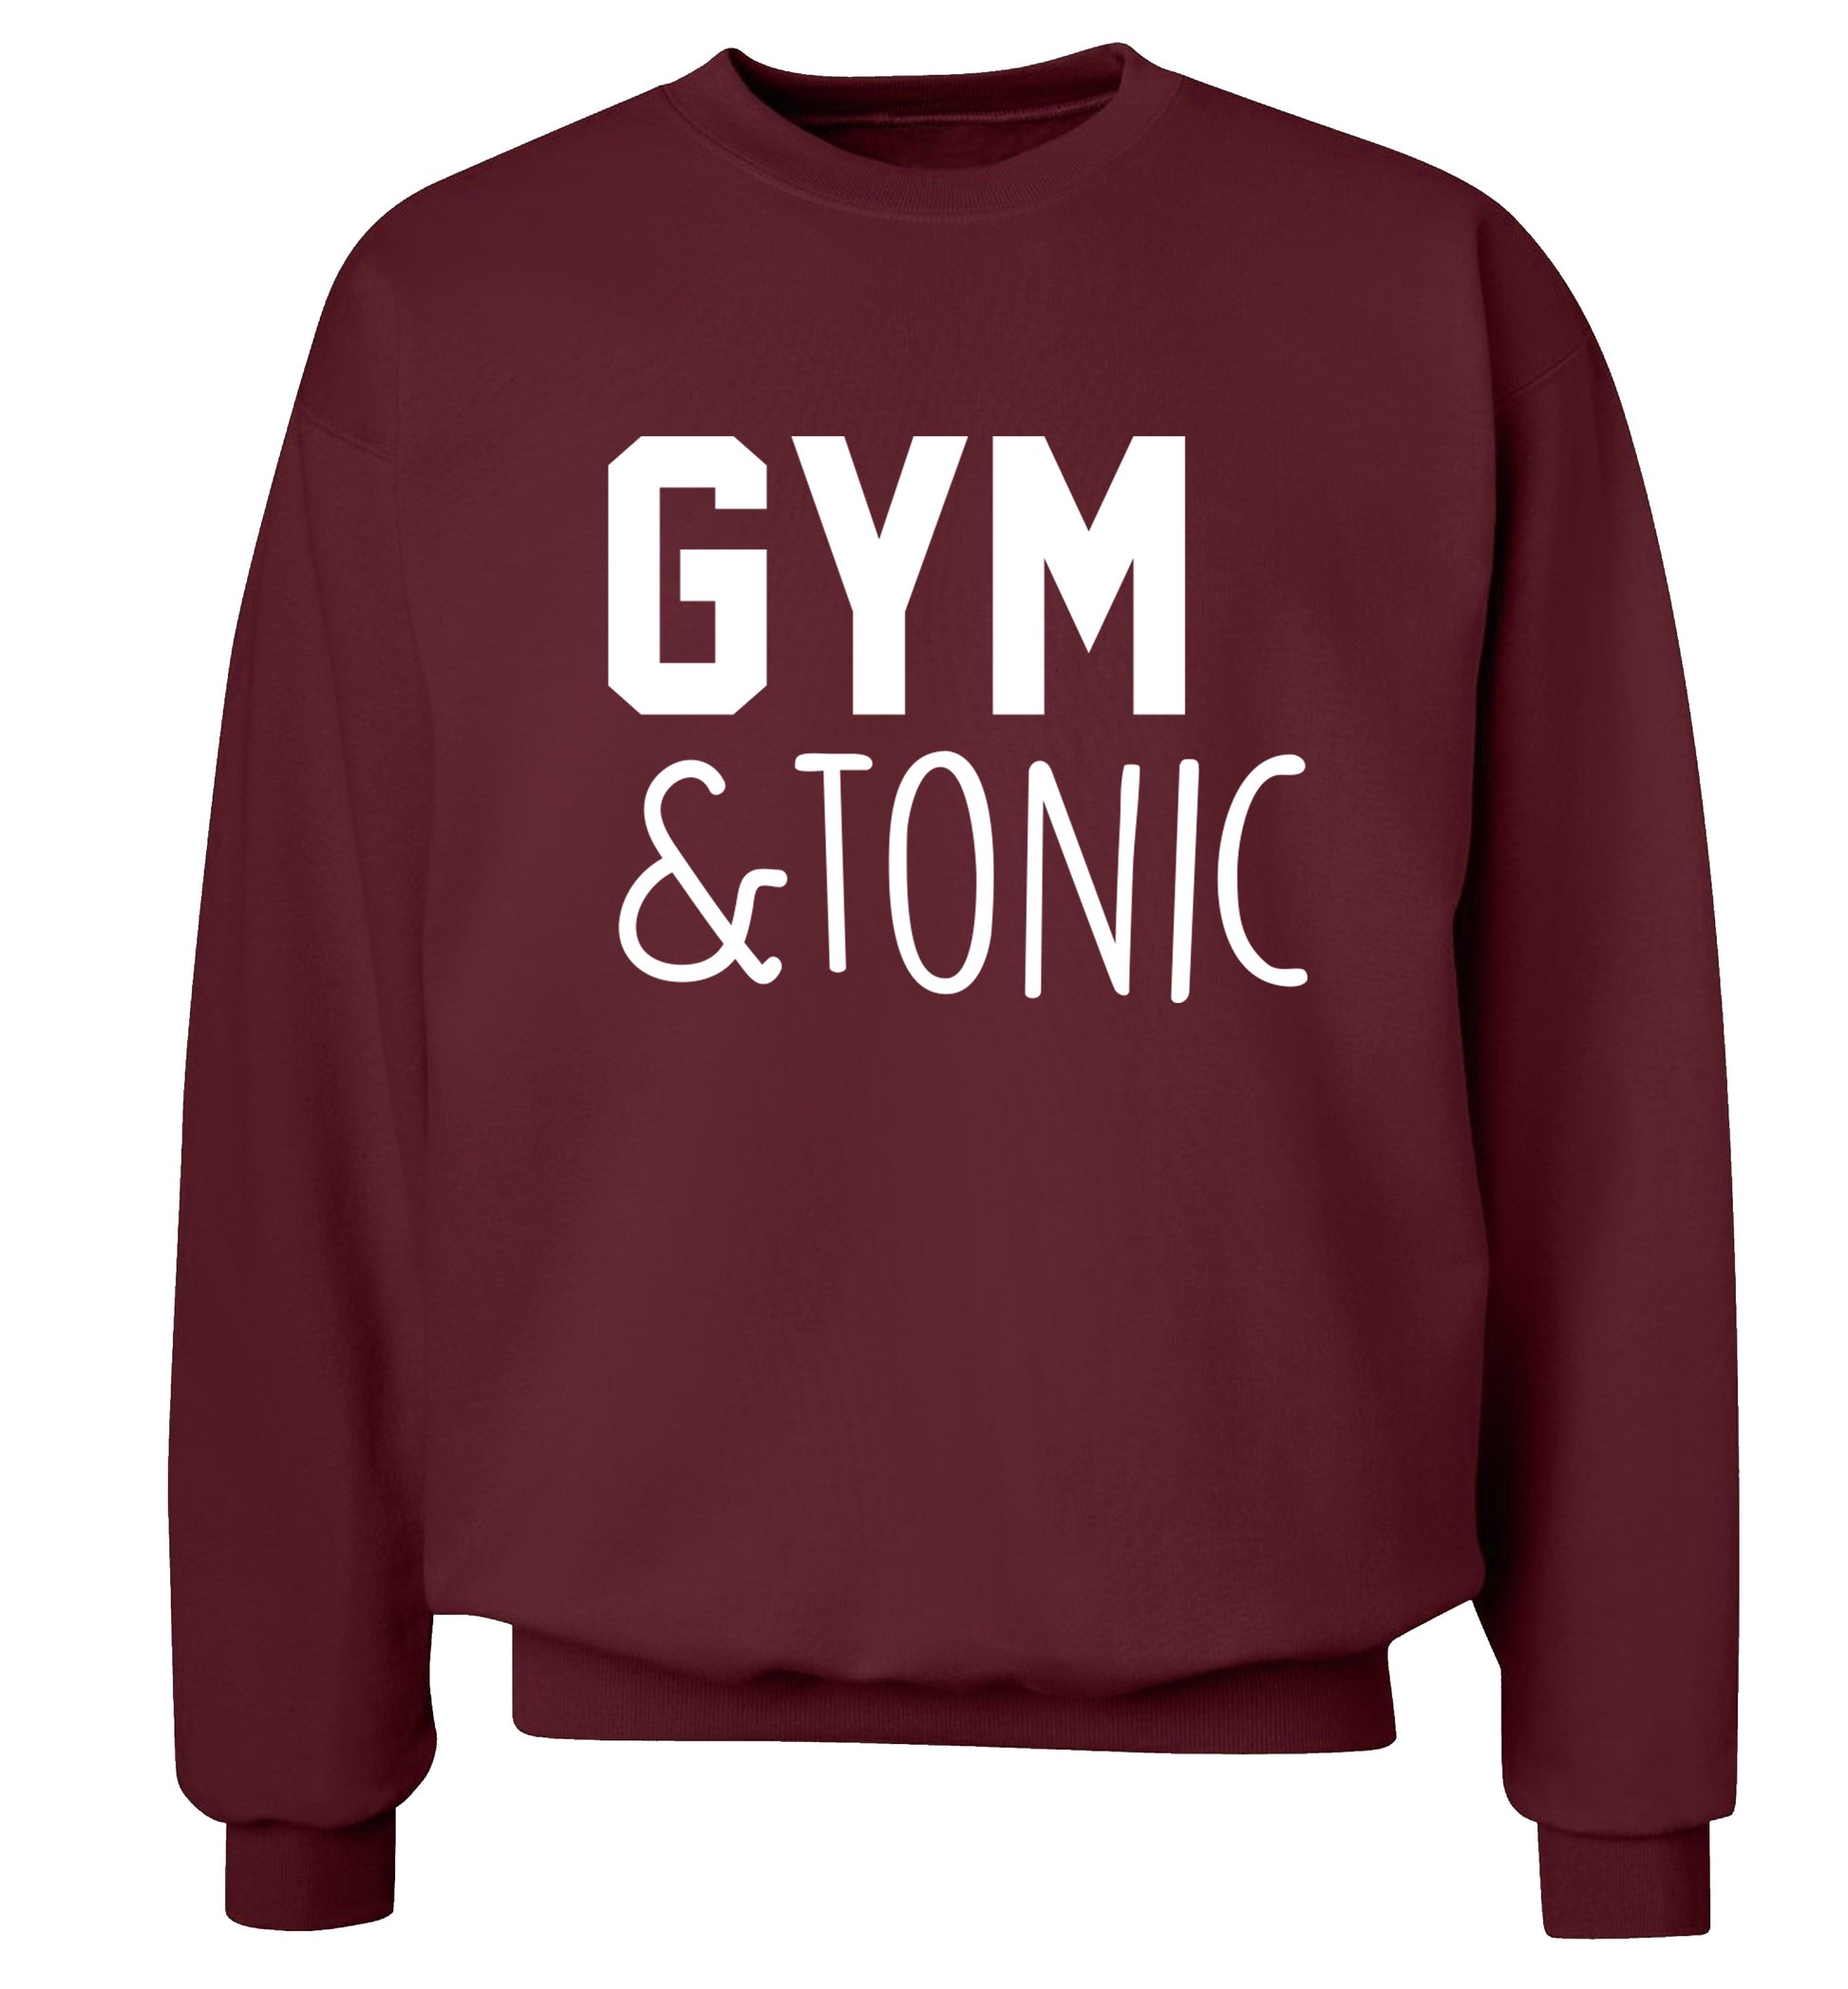 Gym and tonic Adult's unisex maroon Sweater 2XL